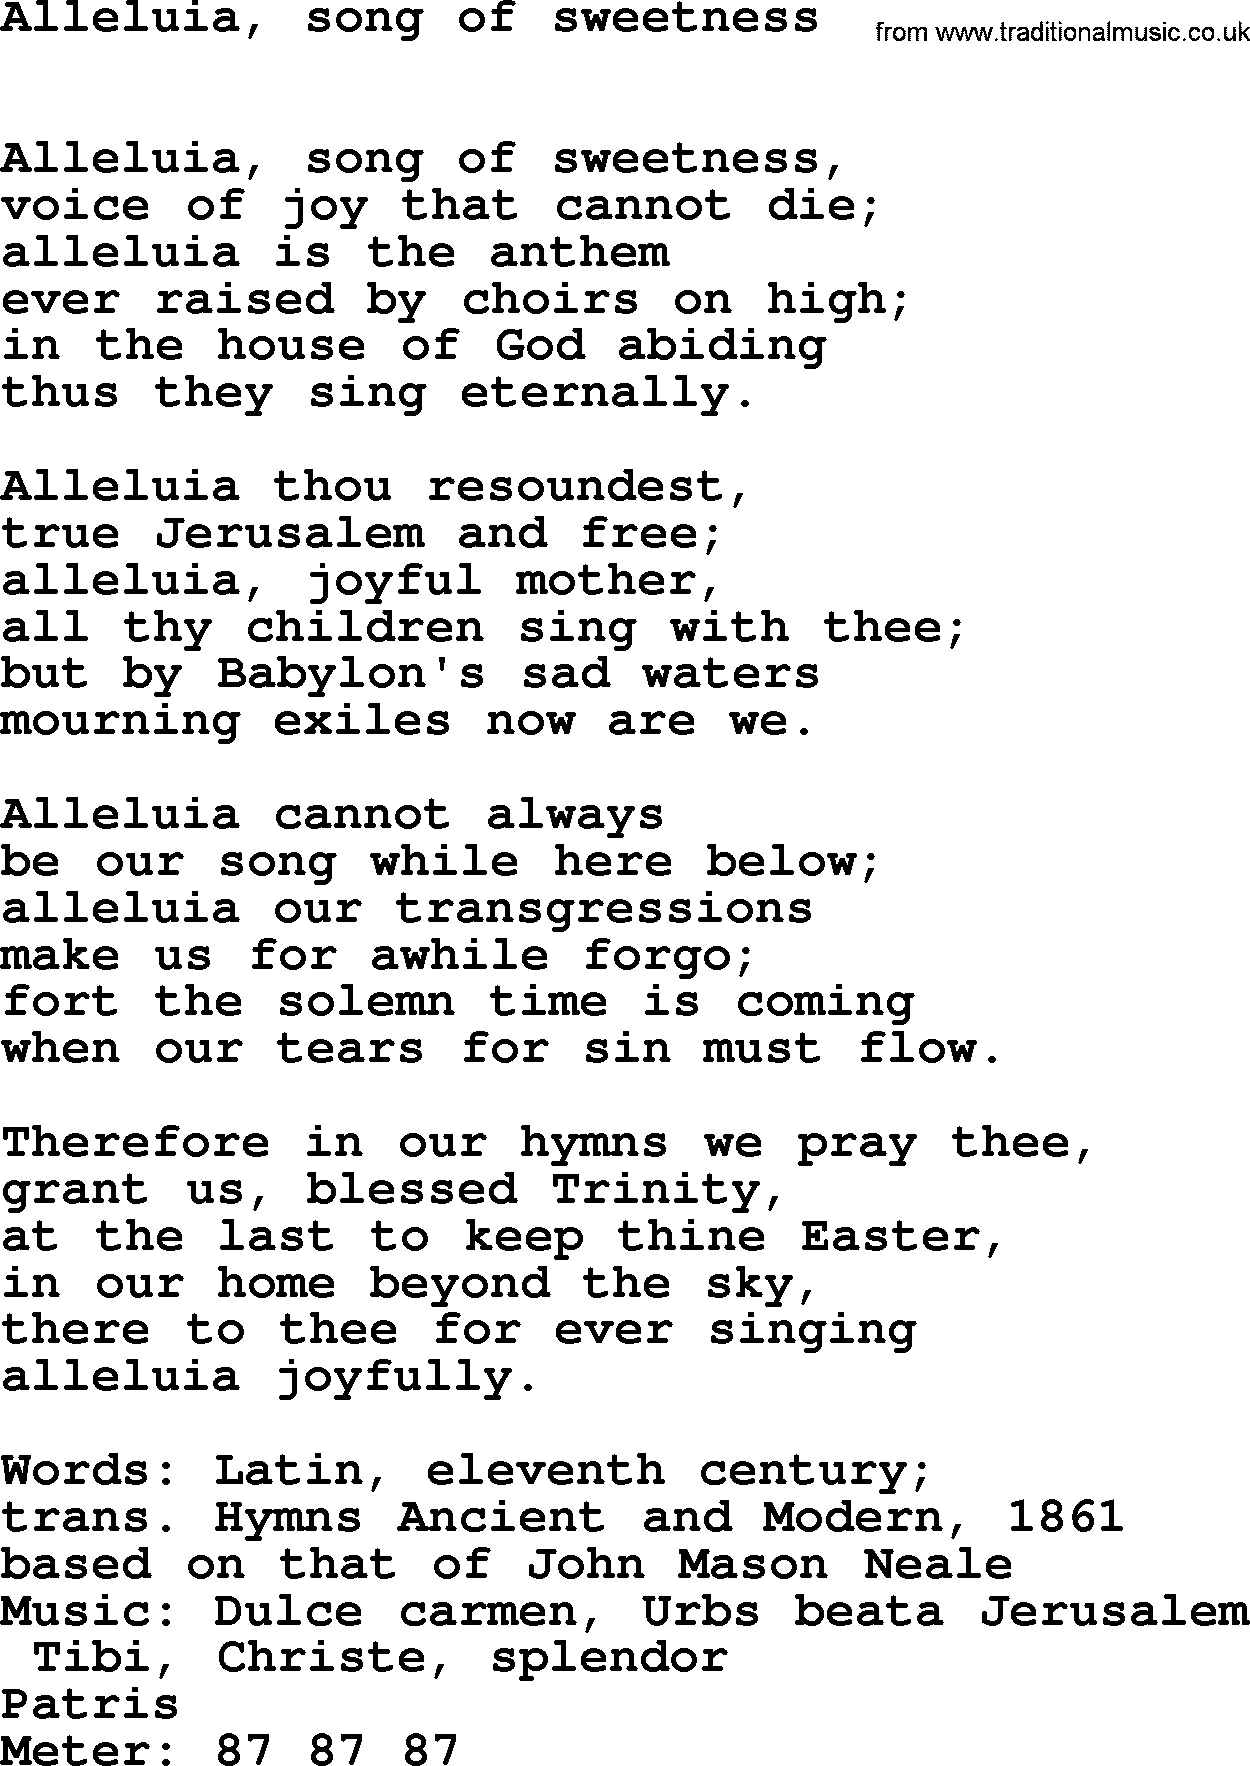 Easter Hymns, Hymn: Alleluia, Song Of Sweetness, lyrics with PDF